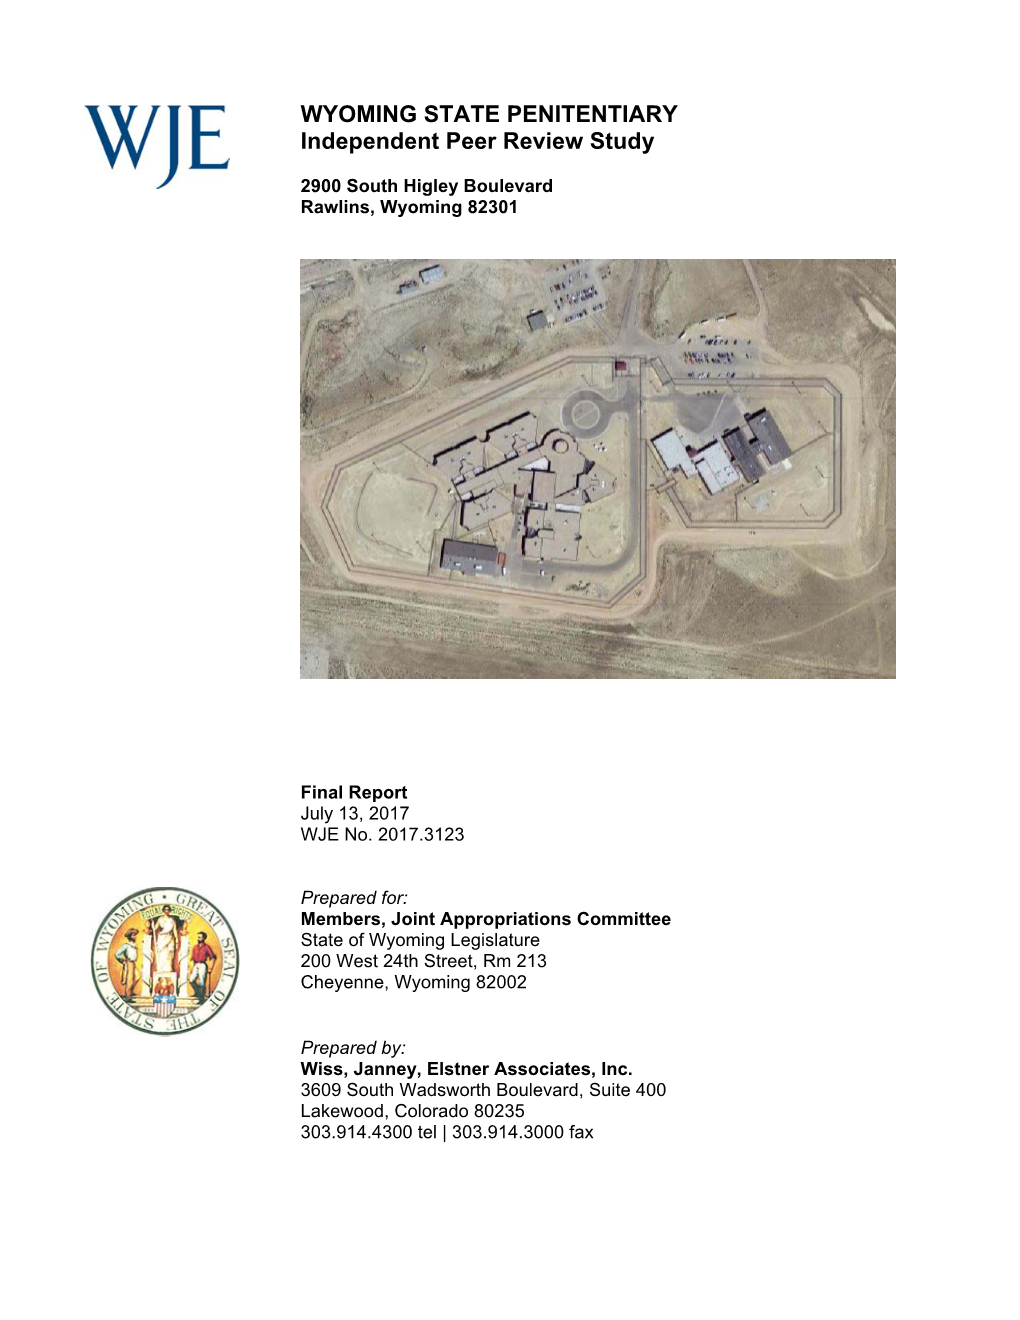 WYOMING STATE PENITENTIARY Independent Peer Review Study